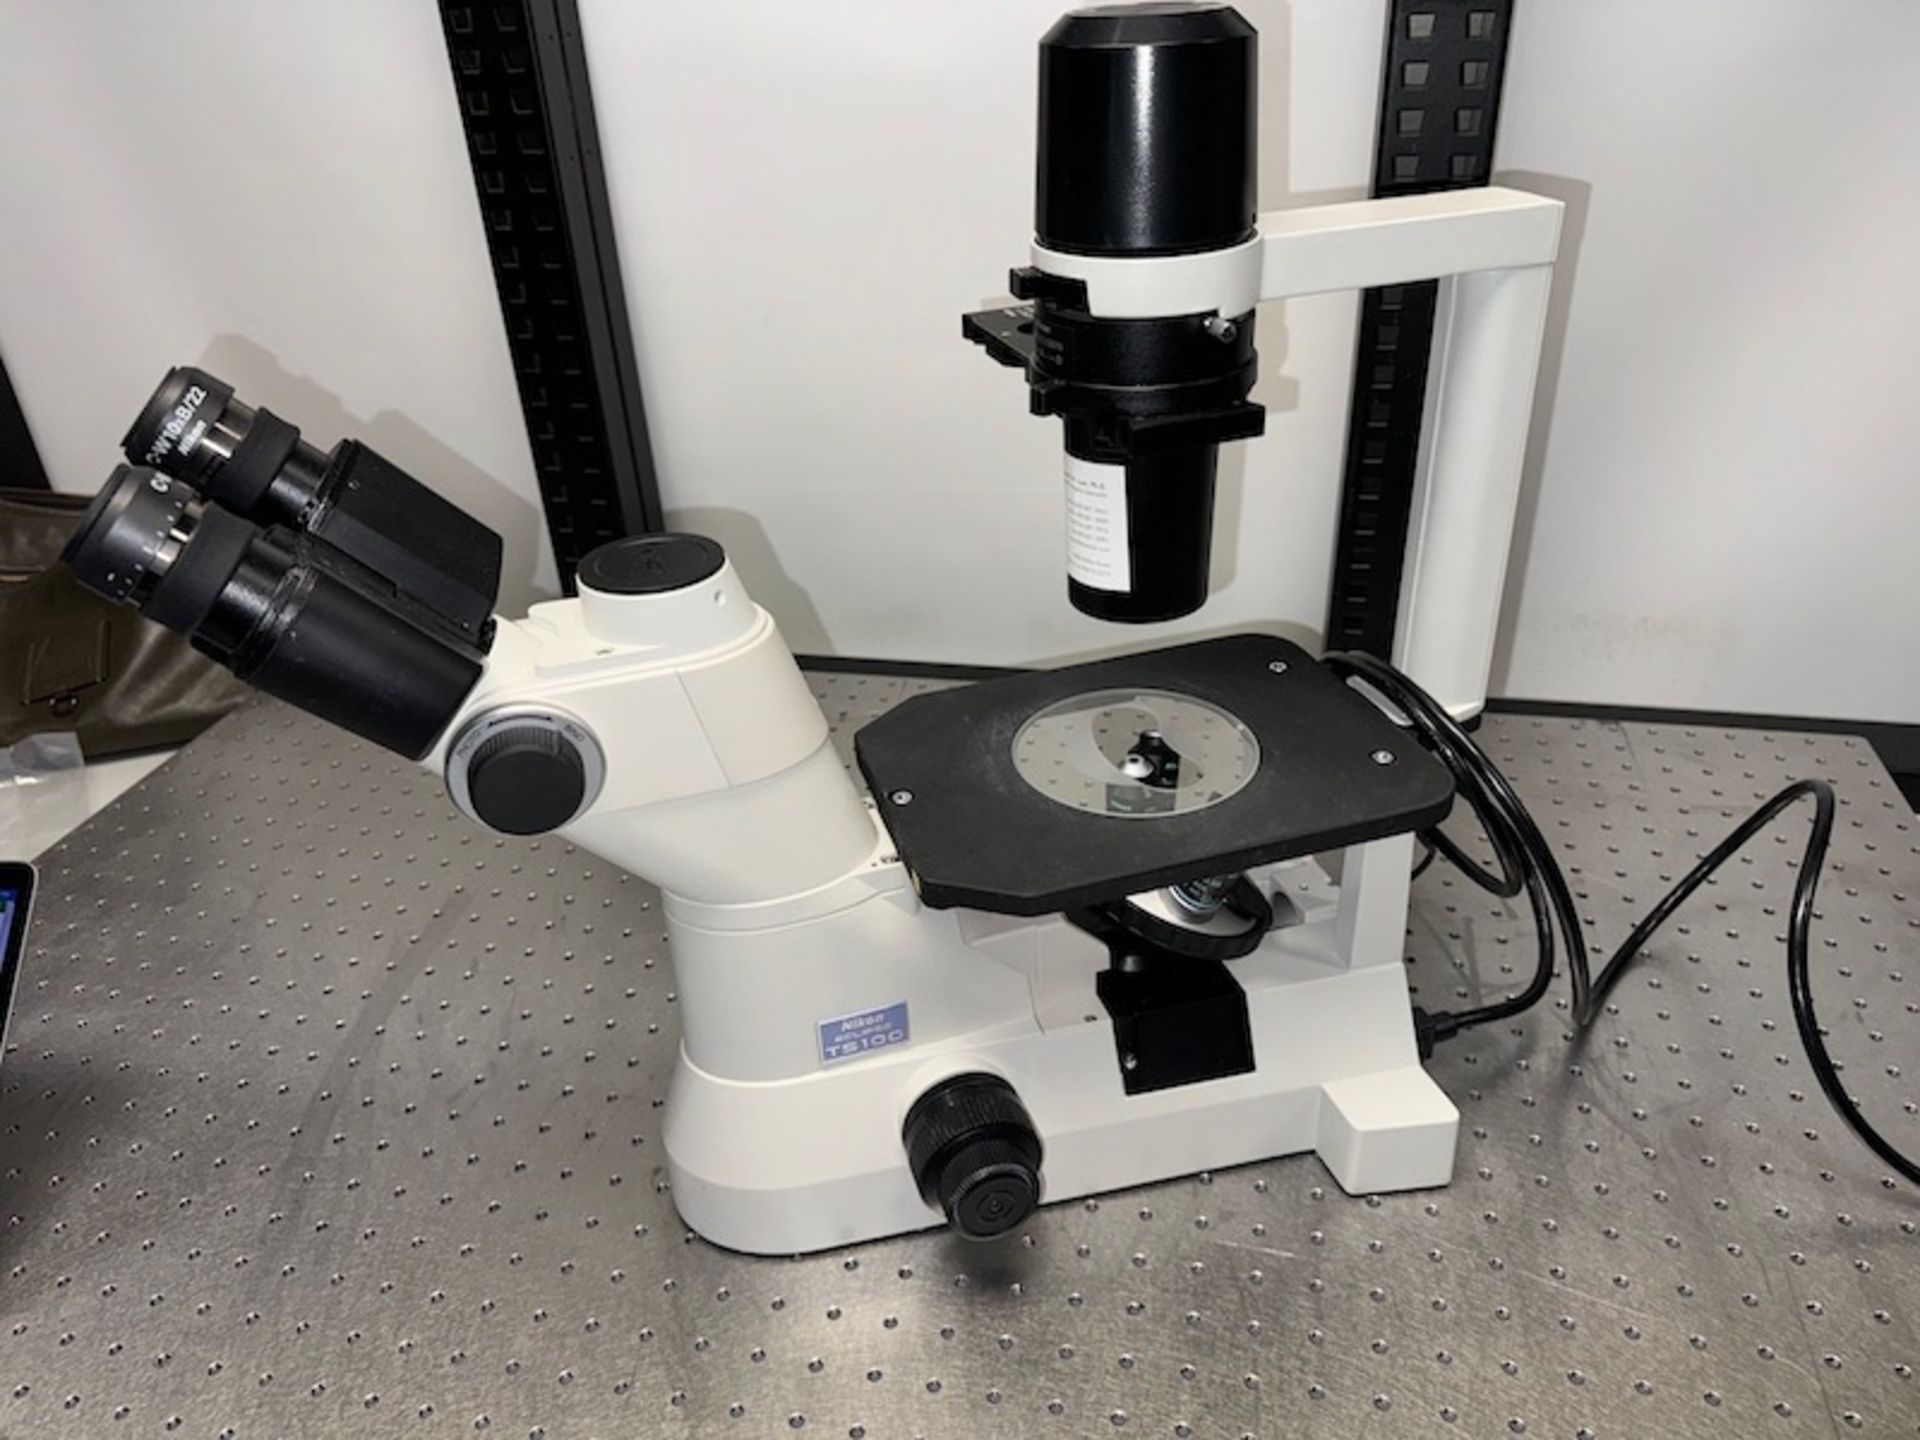 NIKON ECLIPSE INVERTED MICROSCOPE W / EYEPIECES & OBJECTIVE LENS - Image 13 of 14